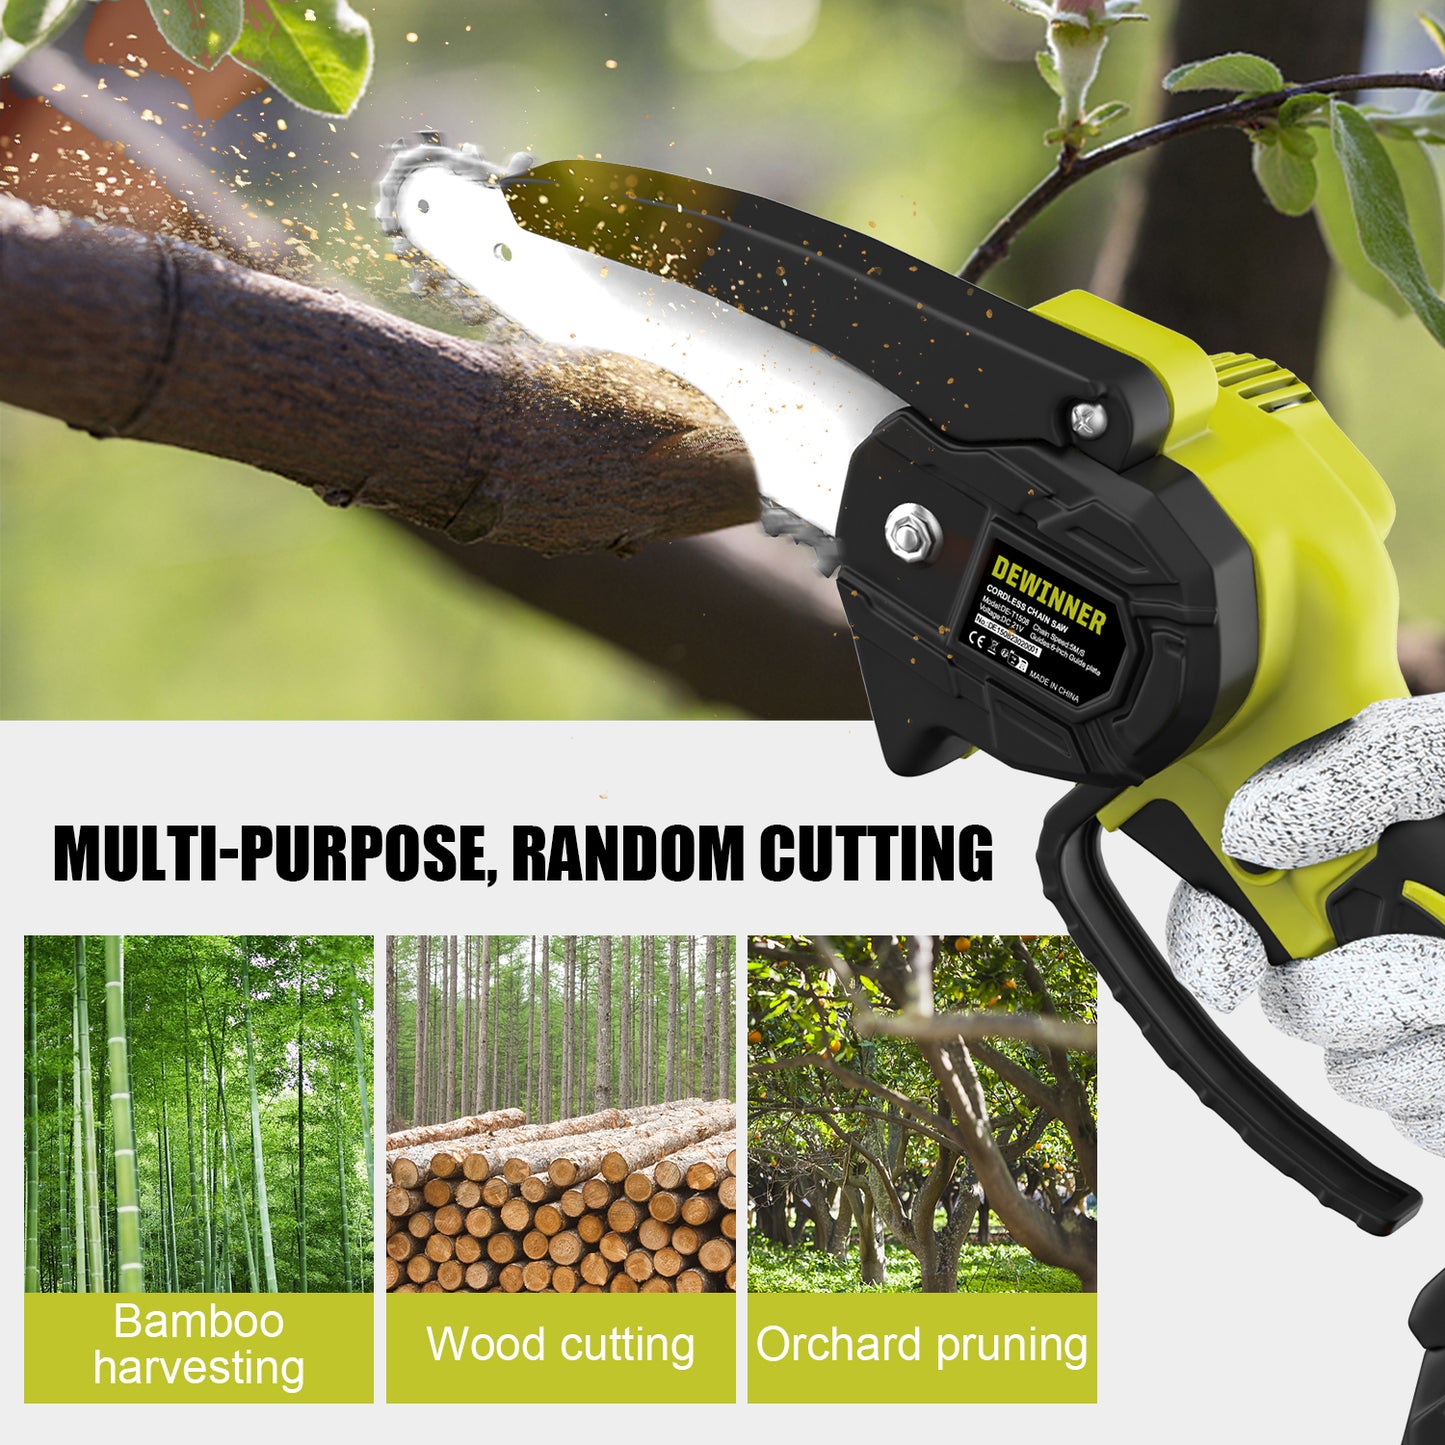 Mini Chainsaw 6-Inch with 2 Battery,DEWINNER Cordless Power Chain saws with Security Lock, Handheld Small Chainsaw for Wood Cutting Tree Trimming